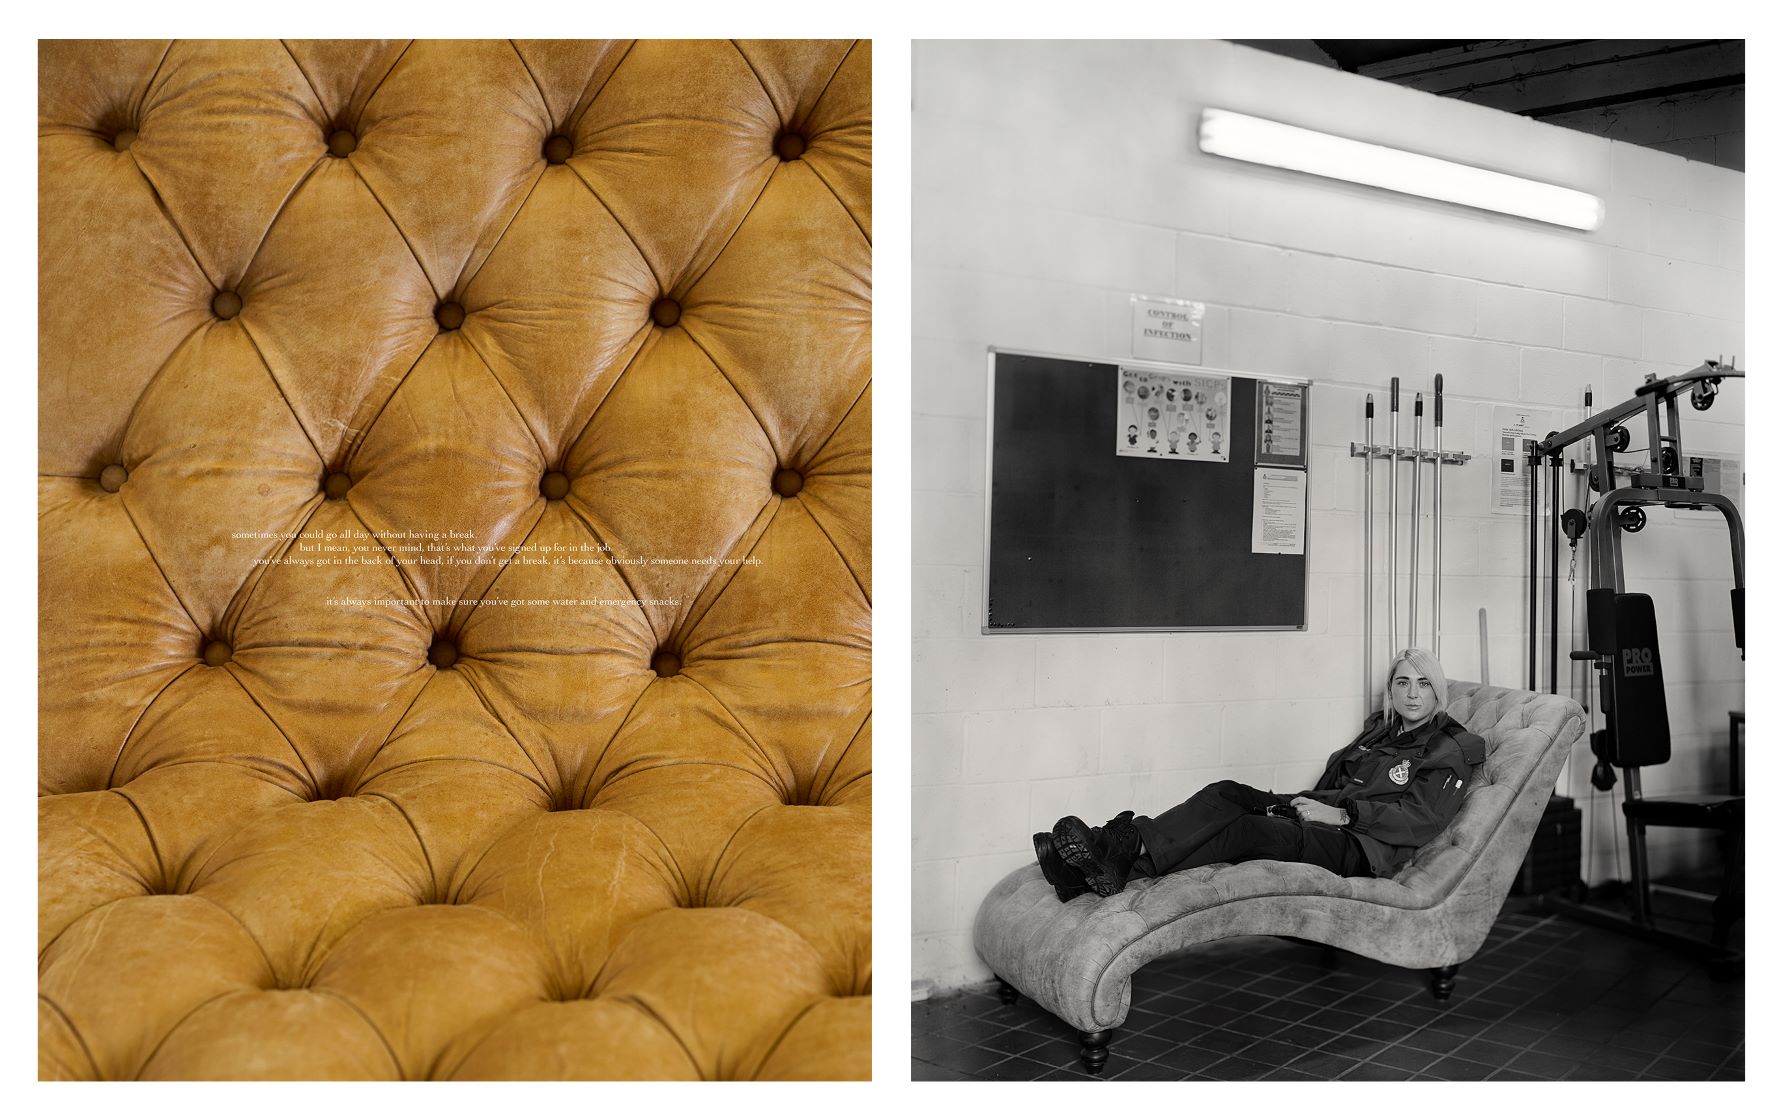 Diptych image of Kayleigh Gibson and their haven